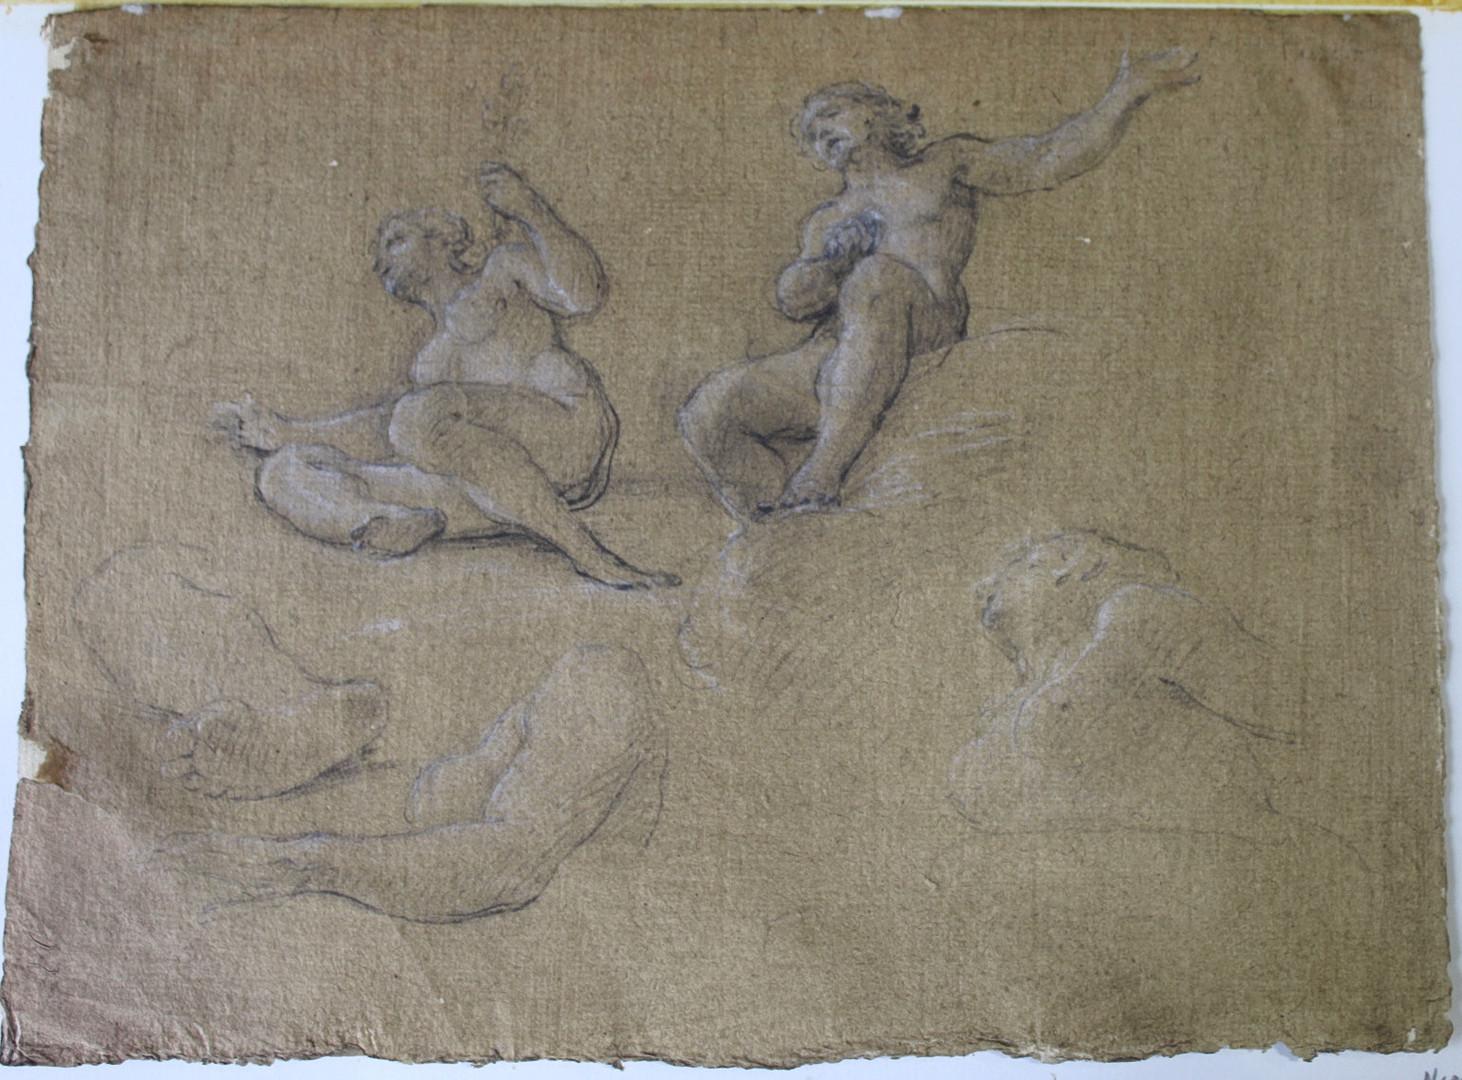 18th Century Italian Old Master Drawing Nude Figure Sketches Male & Female - Art by Circle of Pompeo Batoni (Lucca 1708 - Rome 1787)